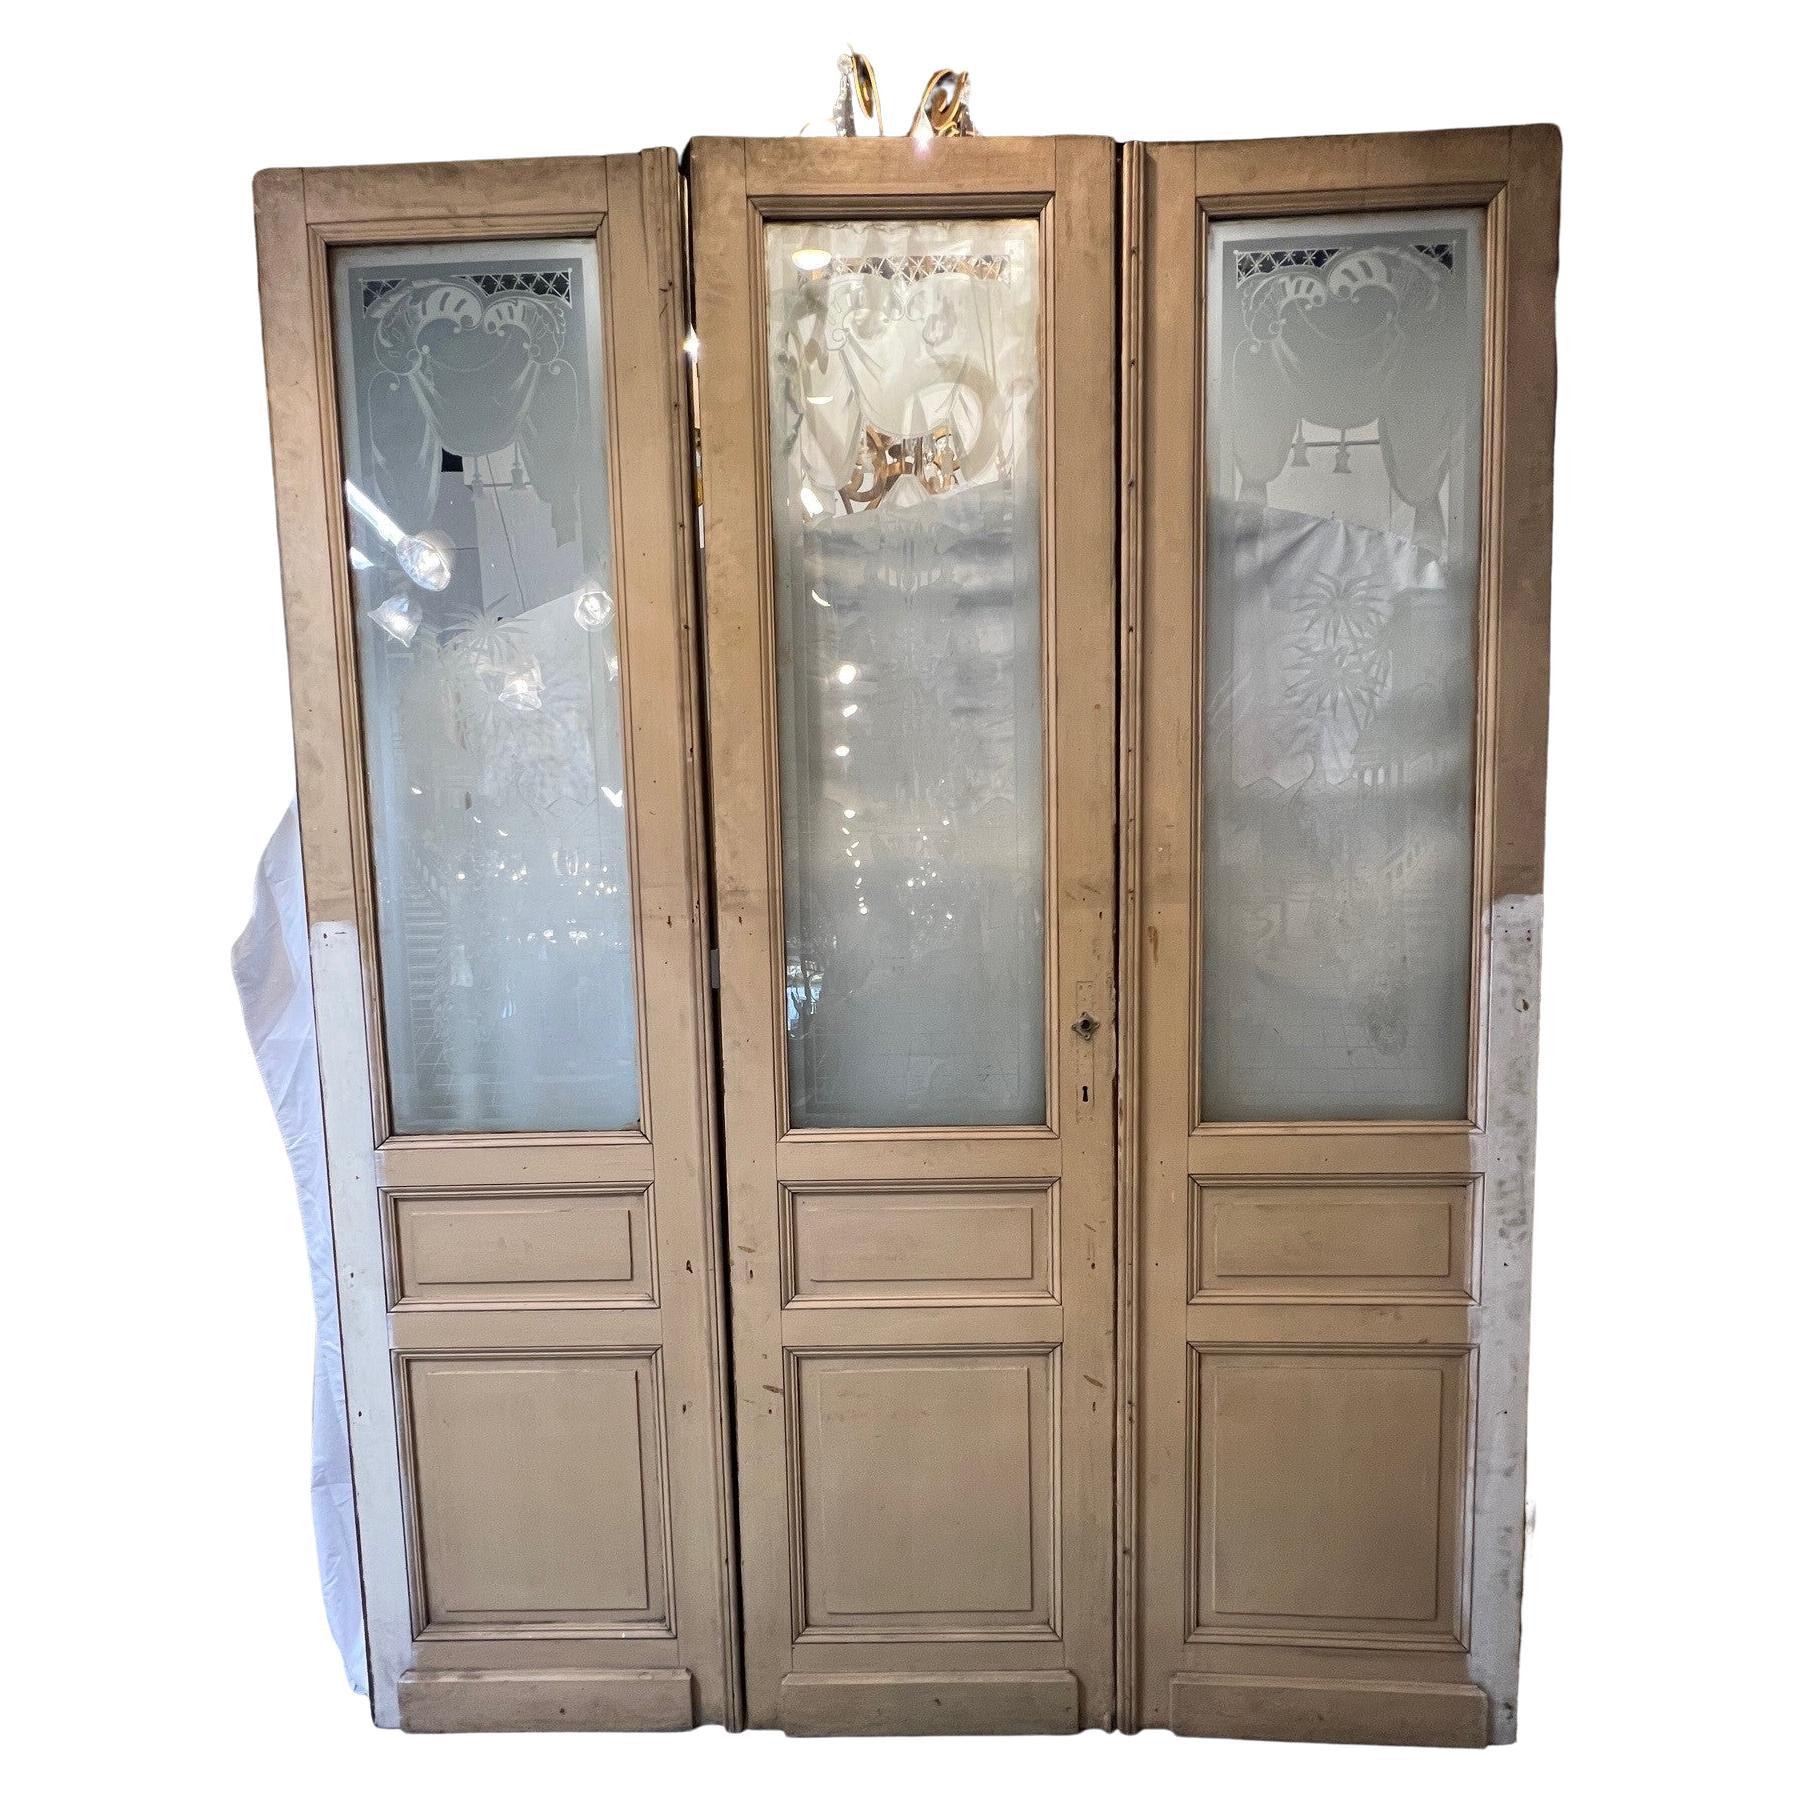 Salvaged from an estate in France, this is a beautiful set of doors with etched glass and raised wood panels. The etched glass is very ornate with the center door featuring a vase with flowers on a balcony overlooking a body of water. The doors to